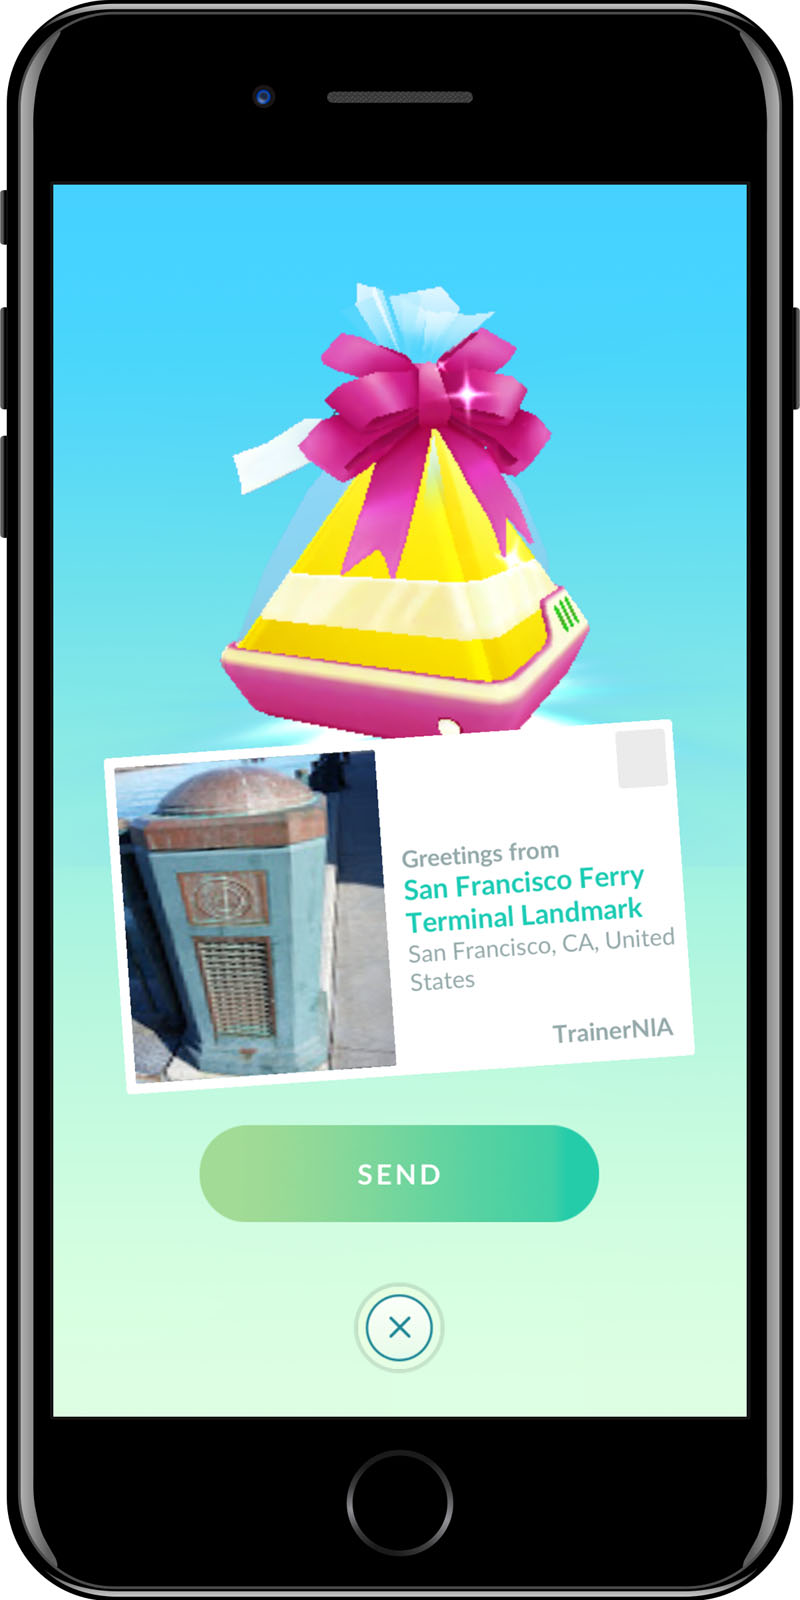 Pokémon Go Gifts  How to send and receive Gift boxes in Pokémon Go